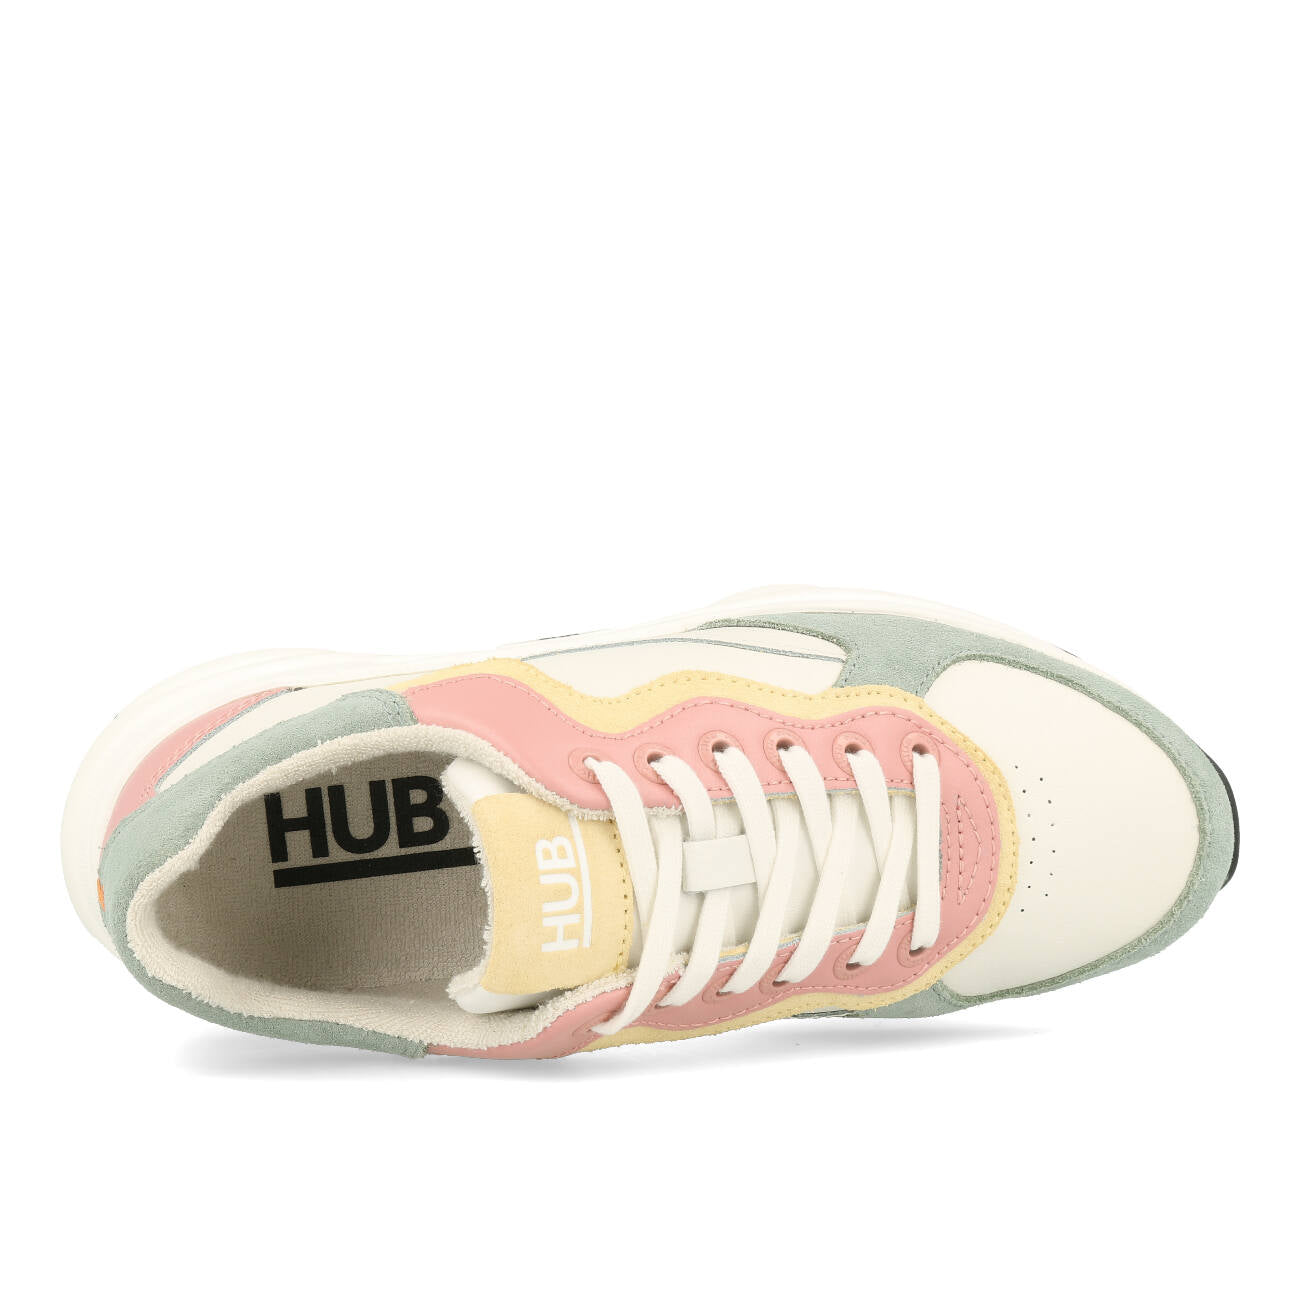 HUB Rock L68 Leather Suede Damen Off White Mineral Pink Off White Black